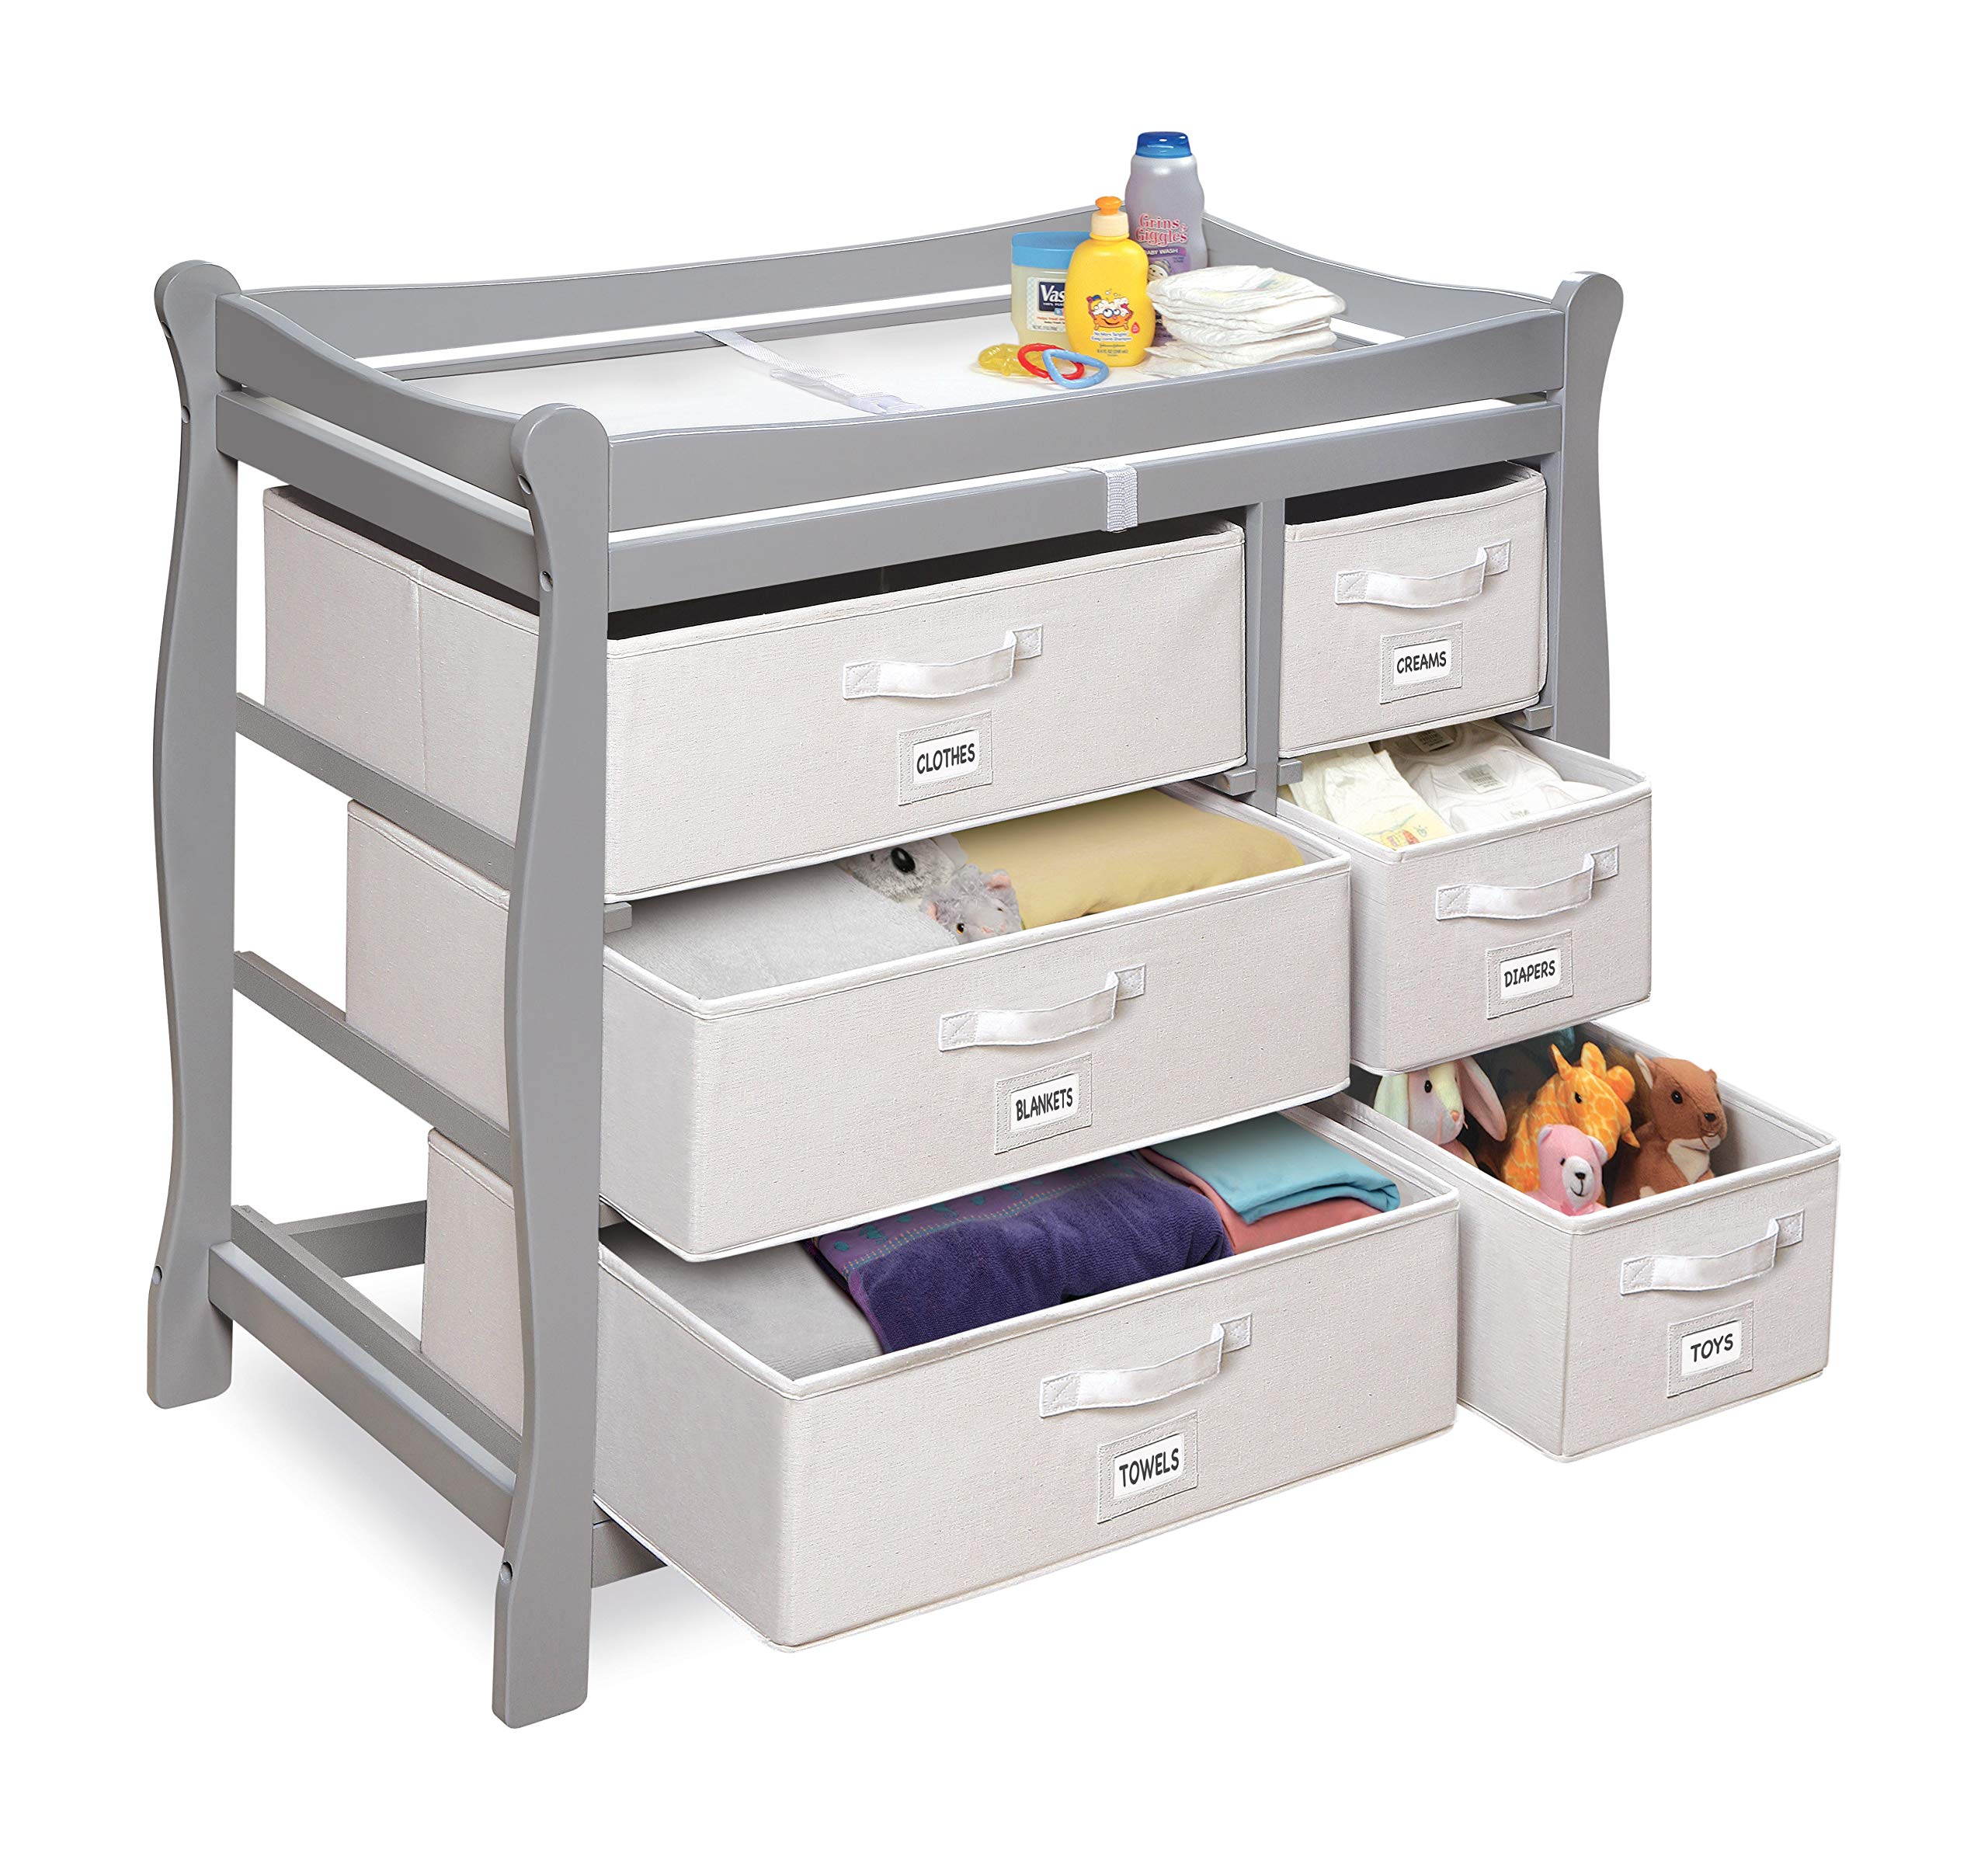 Badger Basket Sleigh Style Baby Changing Table with 6 Storage Baskets & Pad, Cool Gray/White